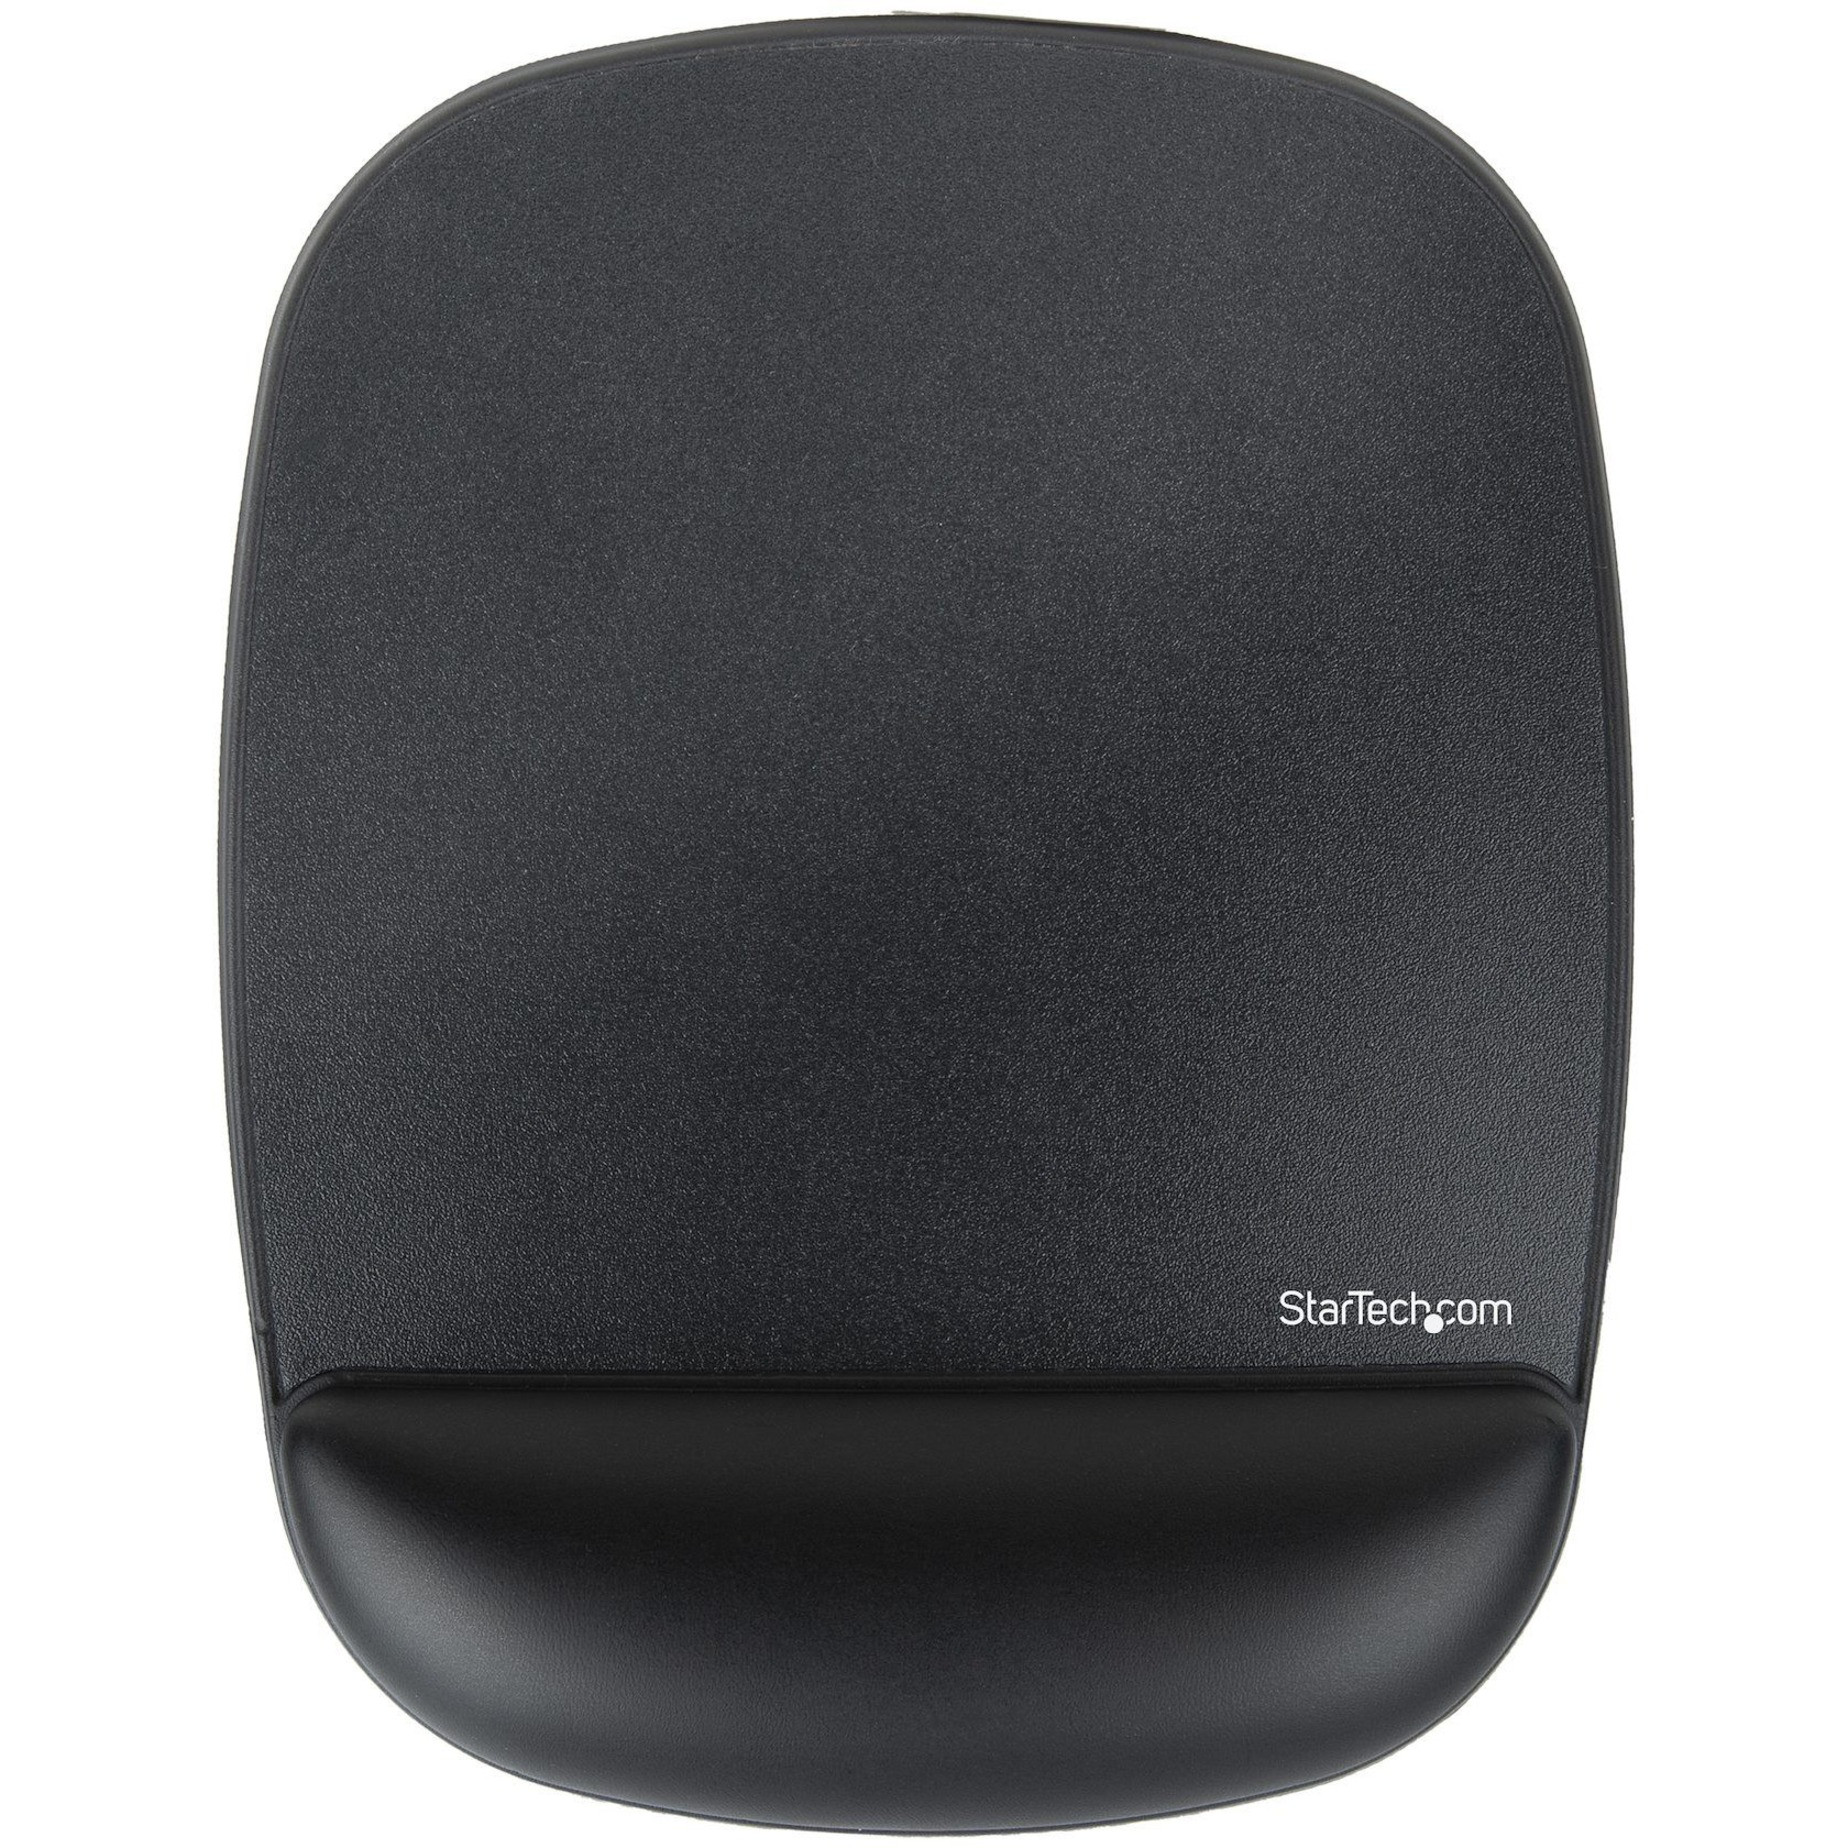 Startech .com Mouse Pad with Hand rest, 6.7x7.1x 0.8in (17x18x2cm